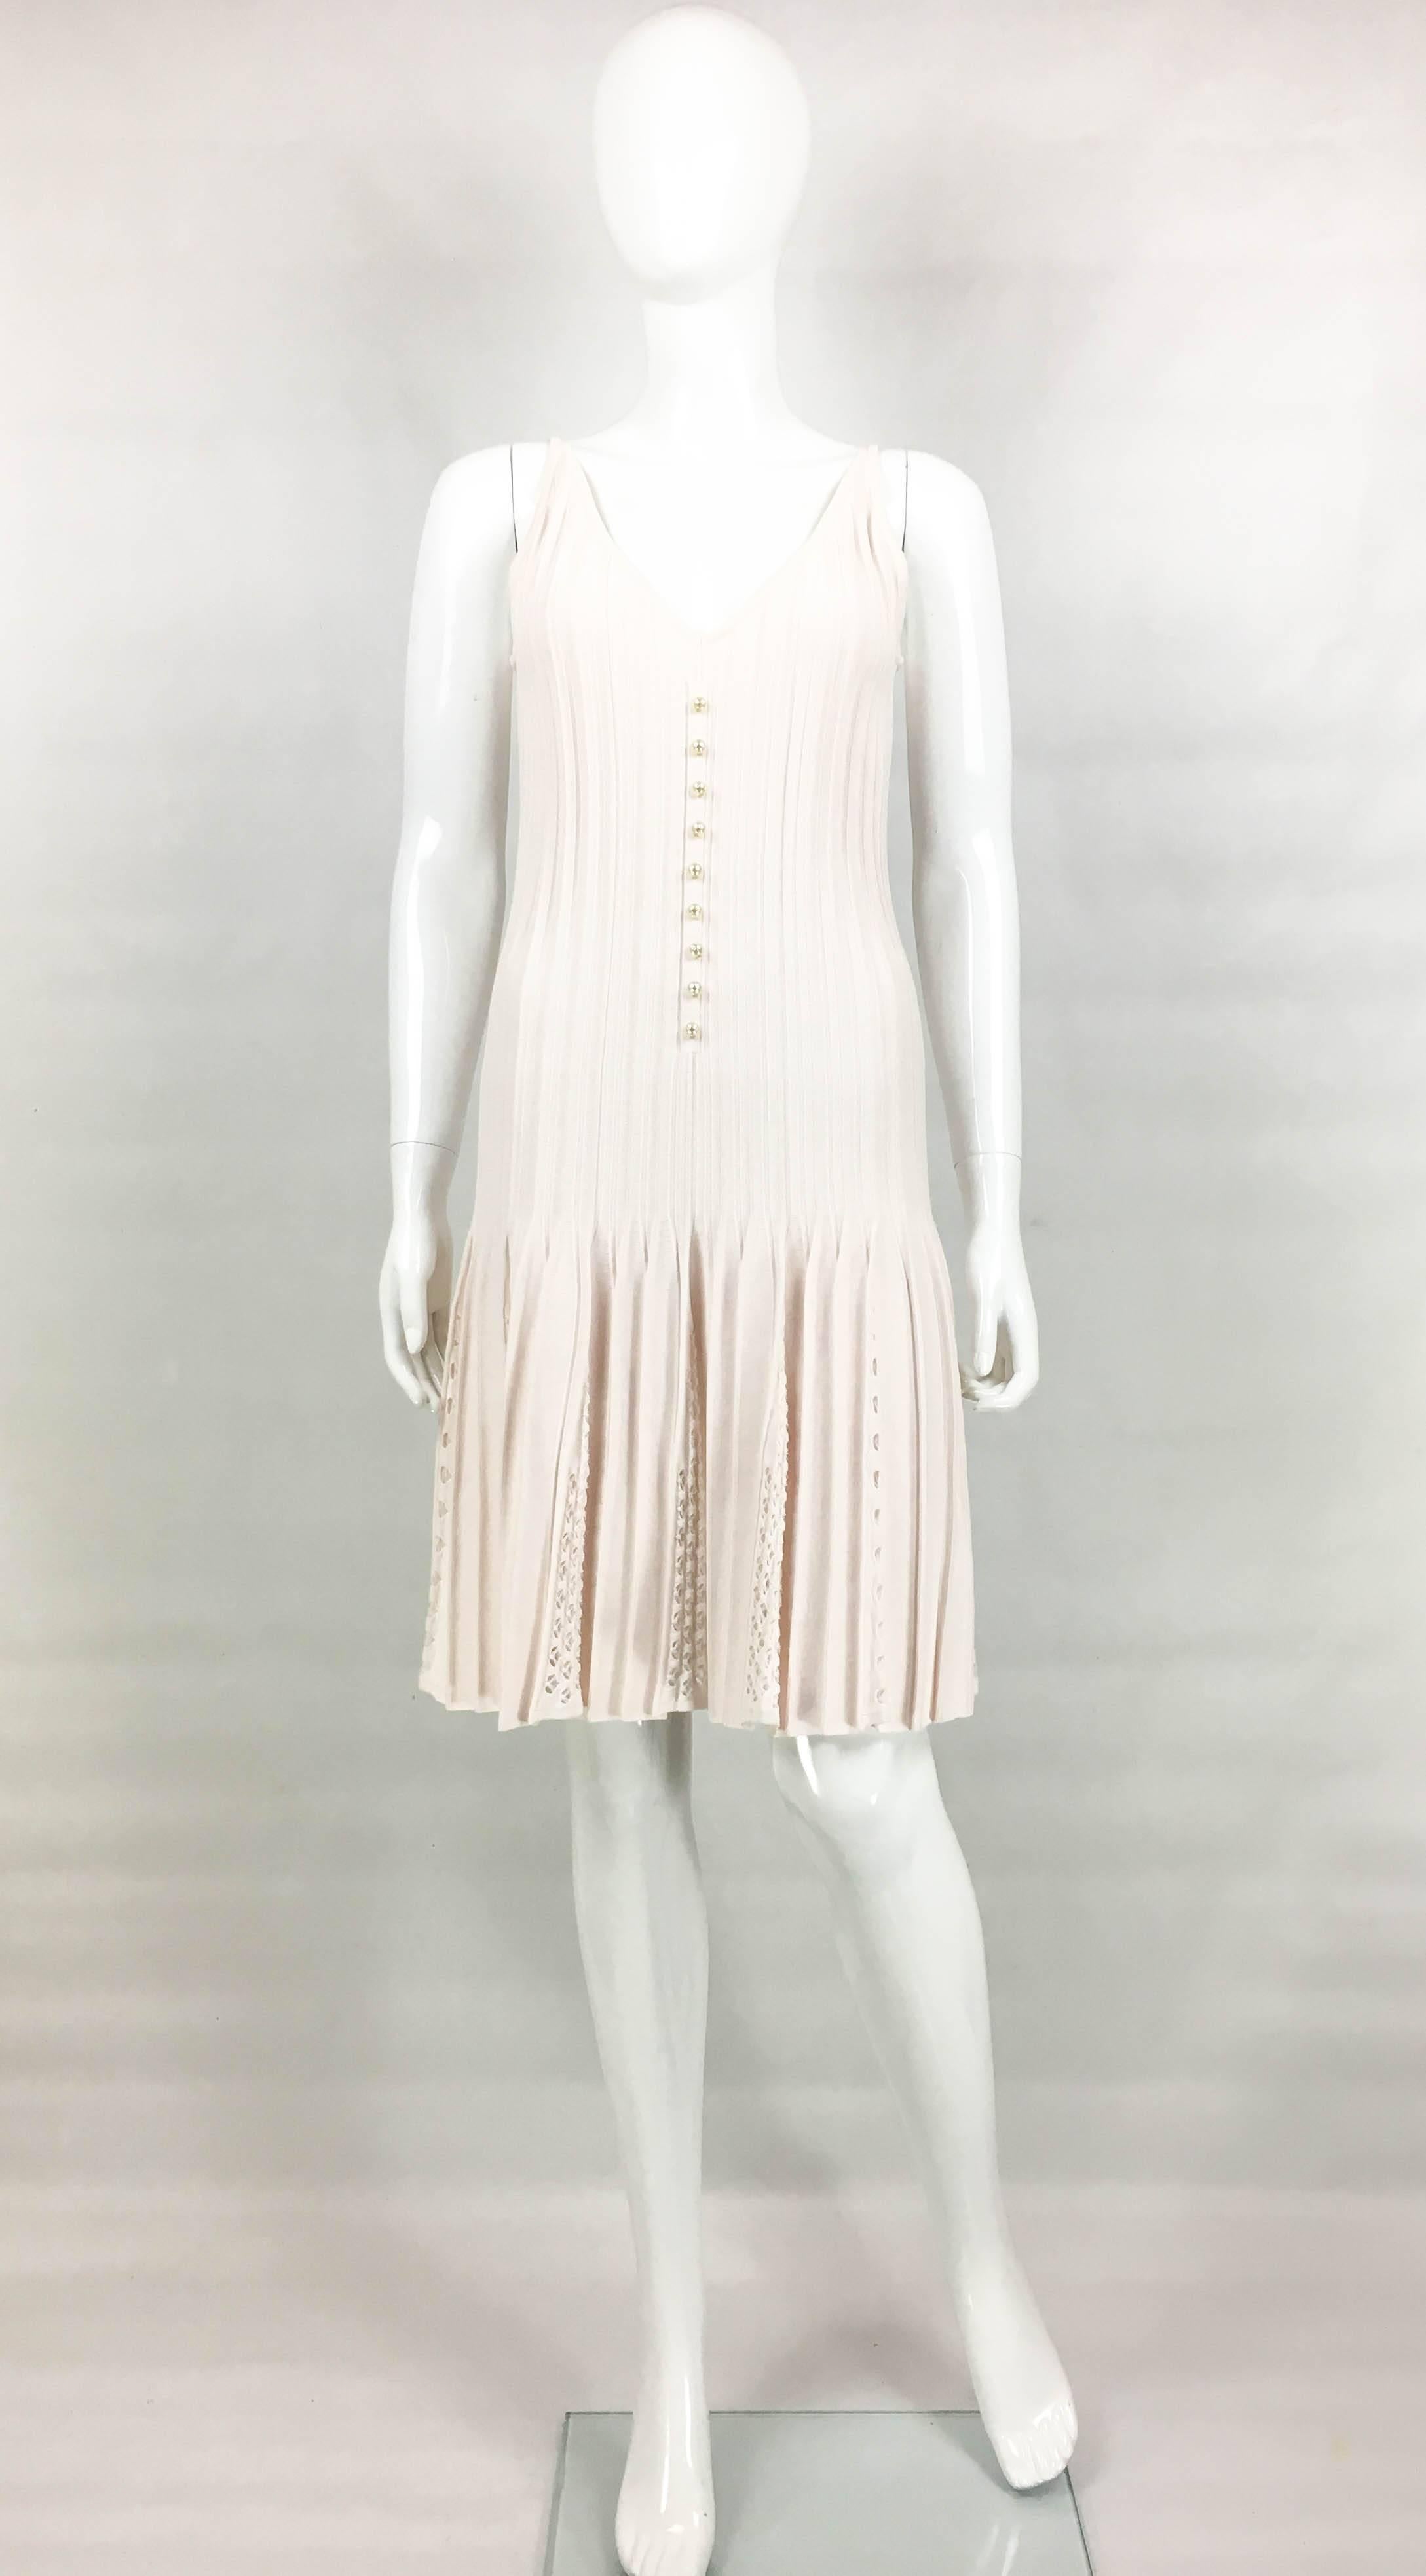 Chanel Pale Pink Summer Dress. This flirty cotton-blend dress by Chanel was part of the 2012 Spring / Summer Collection. With straps and ribs body, it flares out to a pleated skirt from the hips down creating a very flattering silhouette. The skirt